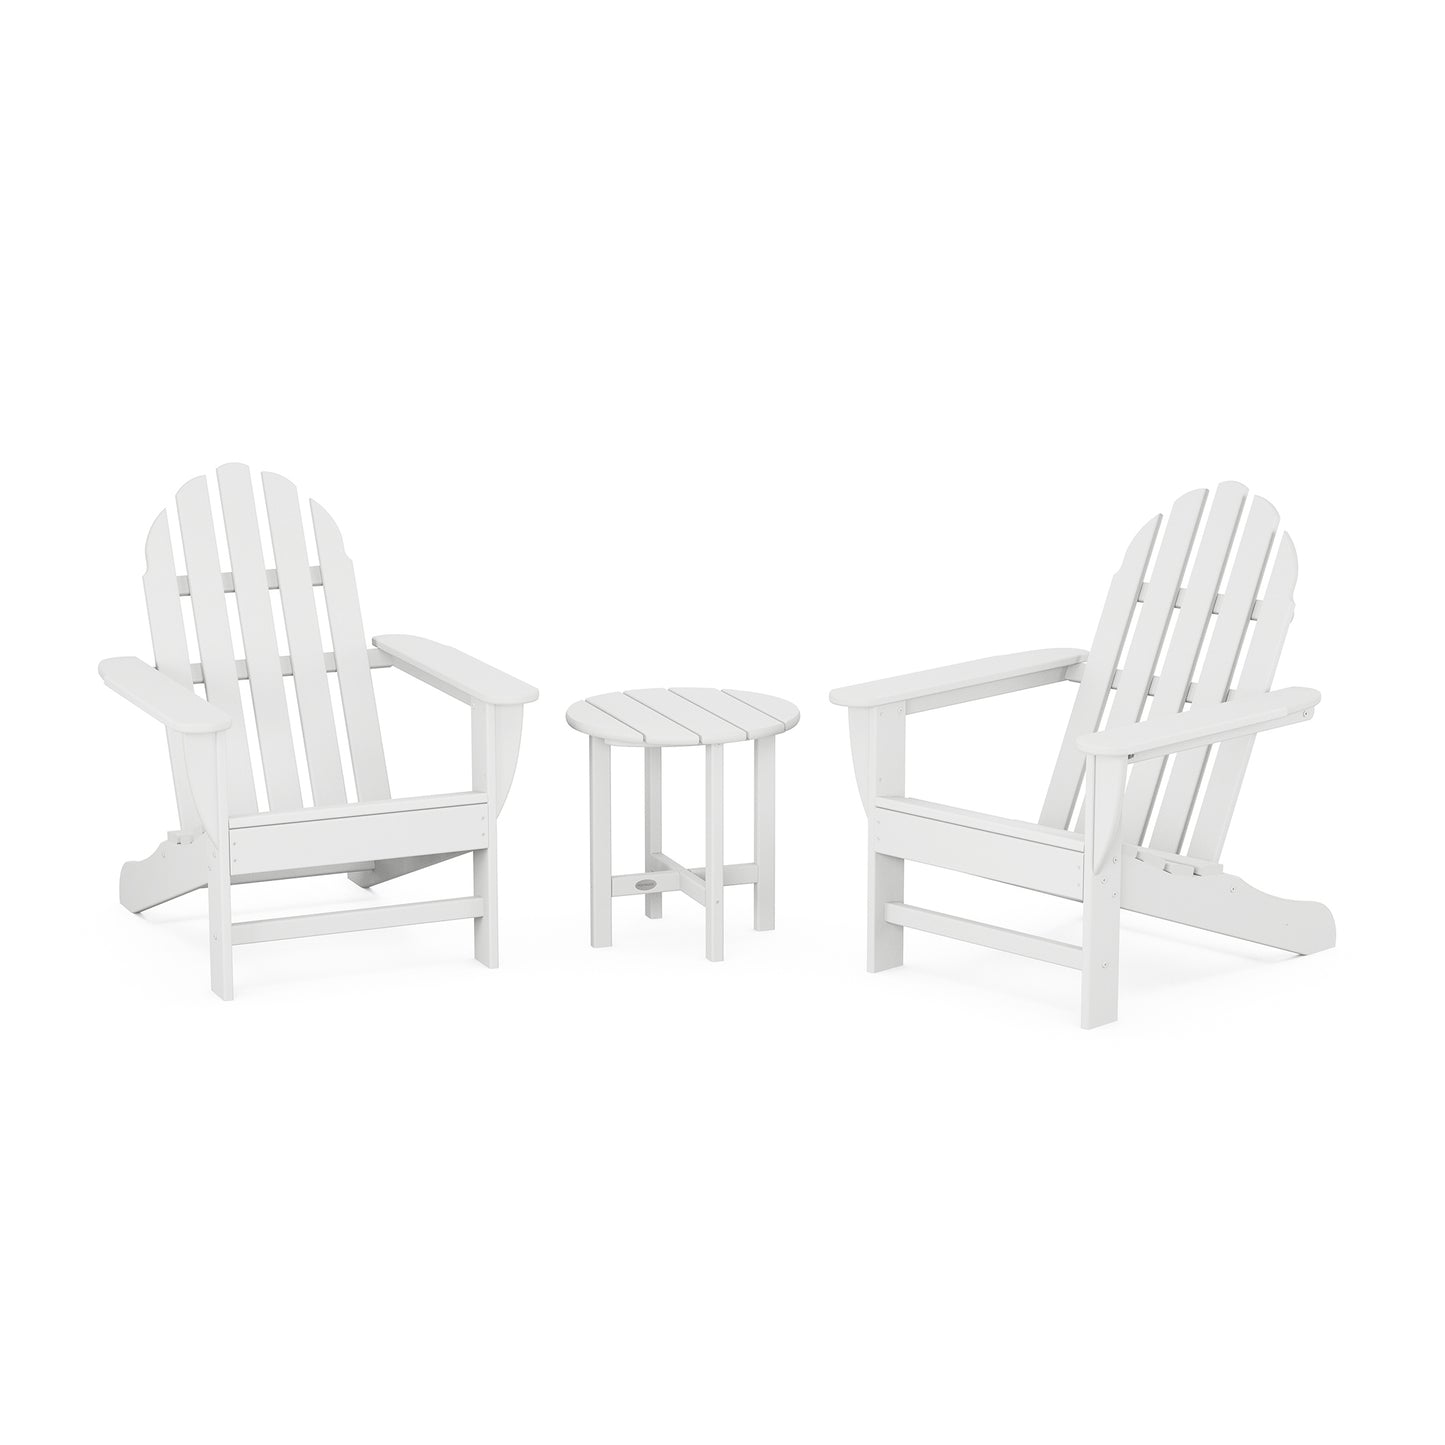 Two white POLYWOOD® Classic Adirondack 3-Piece Sets facing each other with a small round table between them, set against a plain white background.